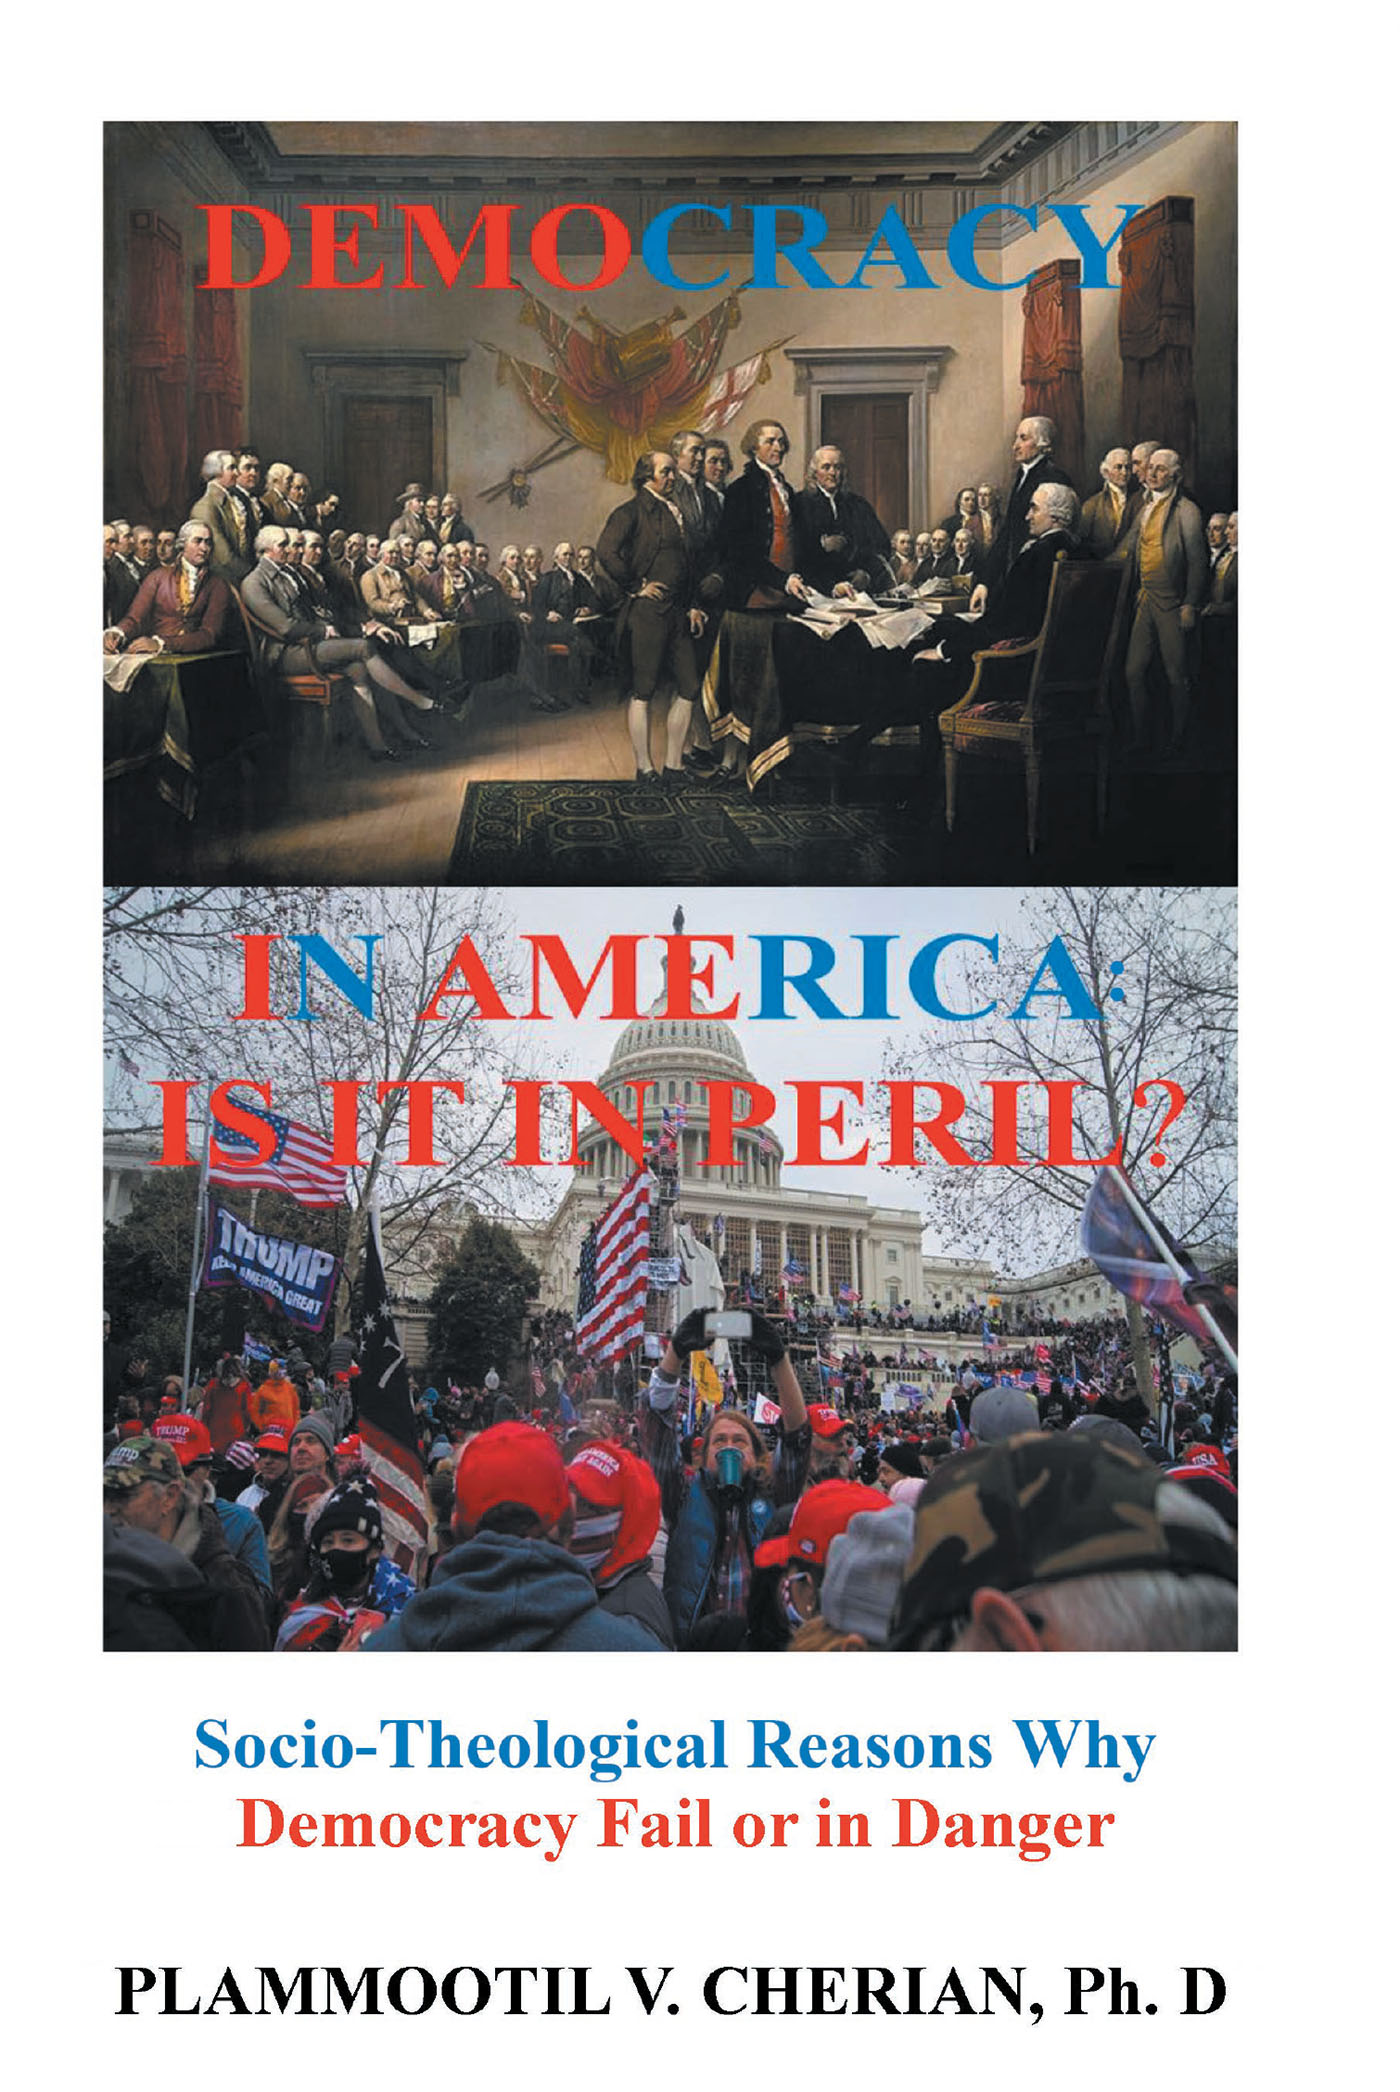 Author Plammoottil V. Cherian’s New Book, "Democracy in America: Is It in Peril?" Offers Socio-Theological Reasons Why Democracies Fail or Are in Danger